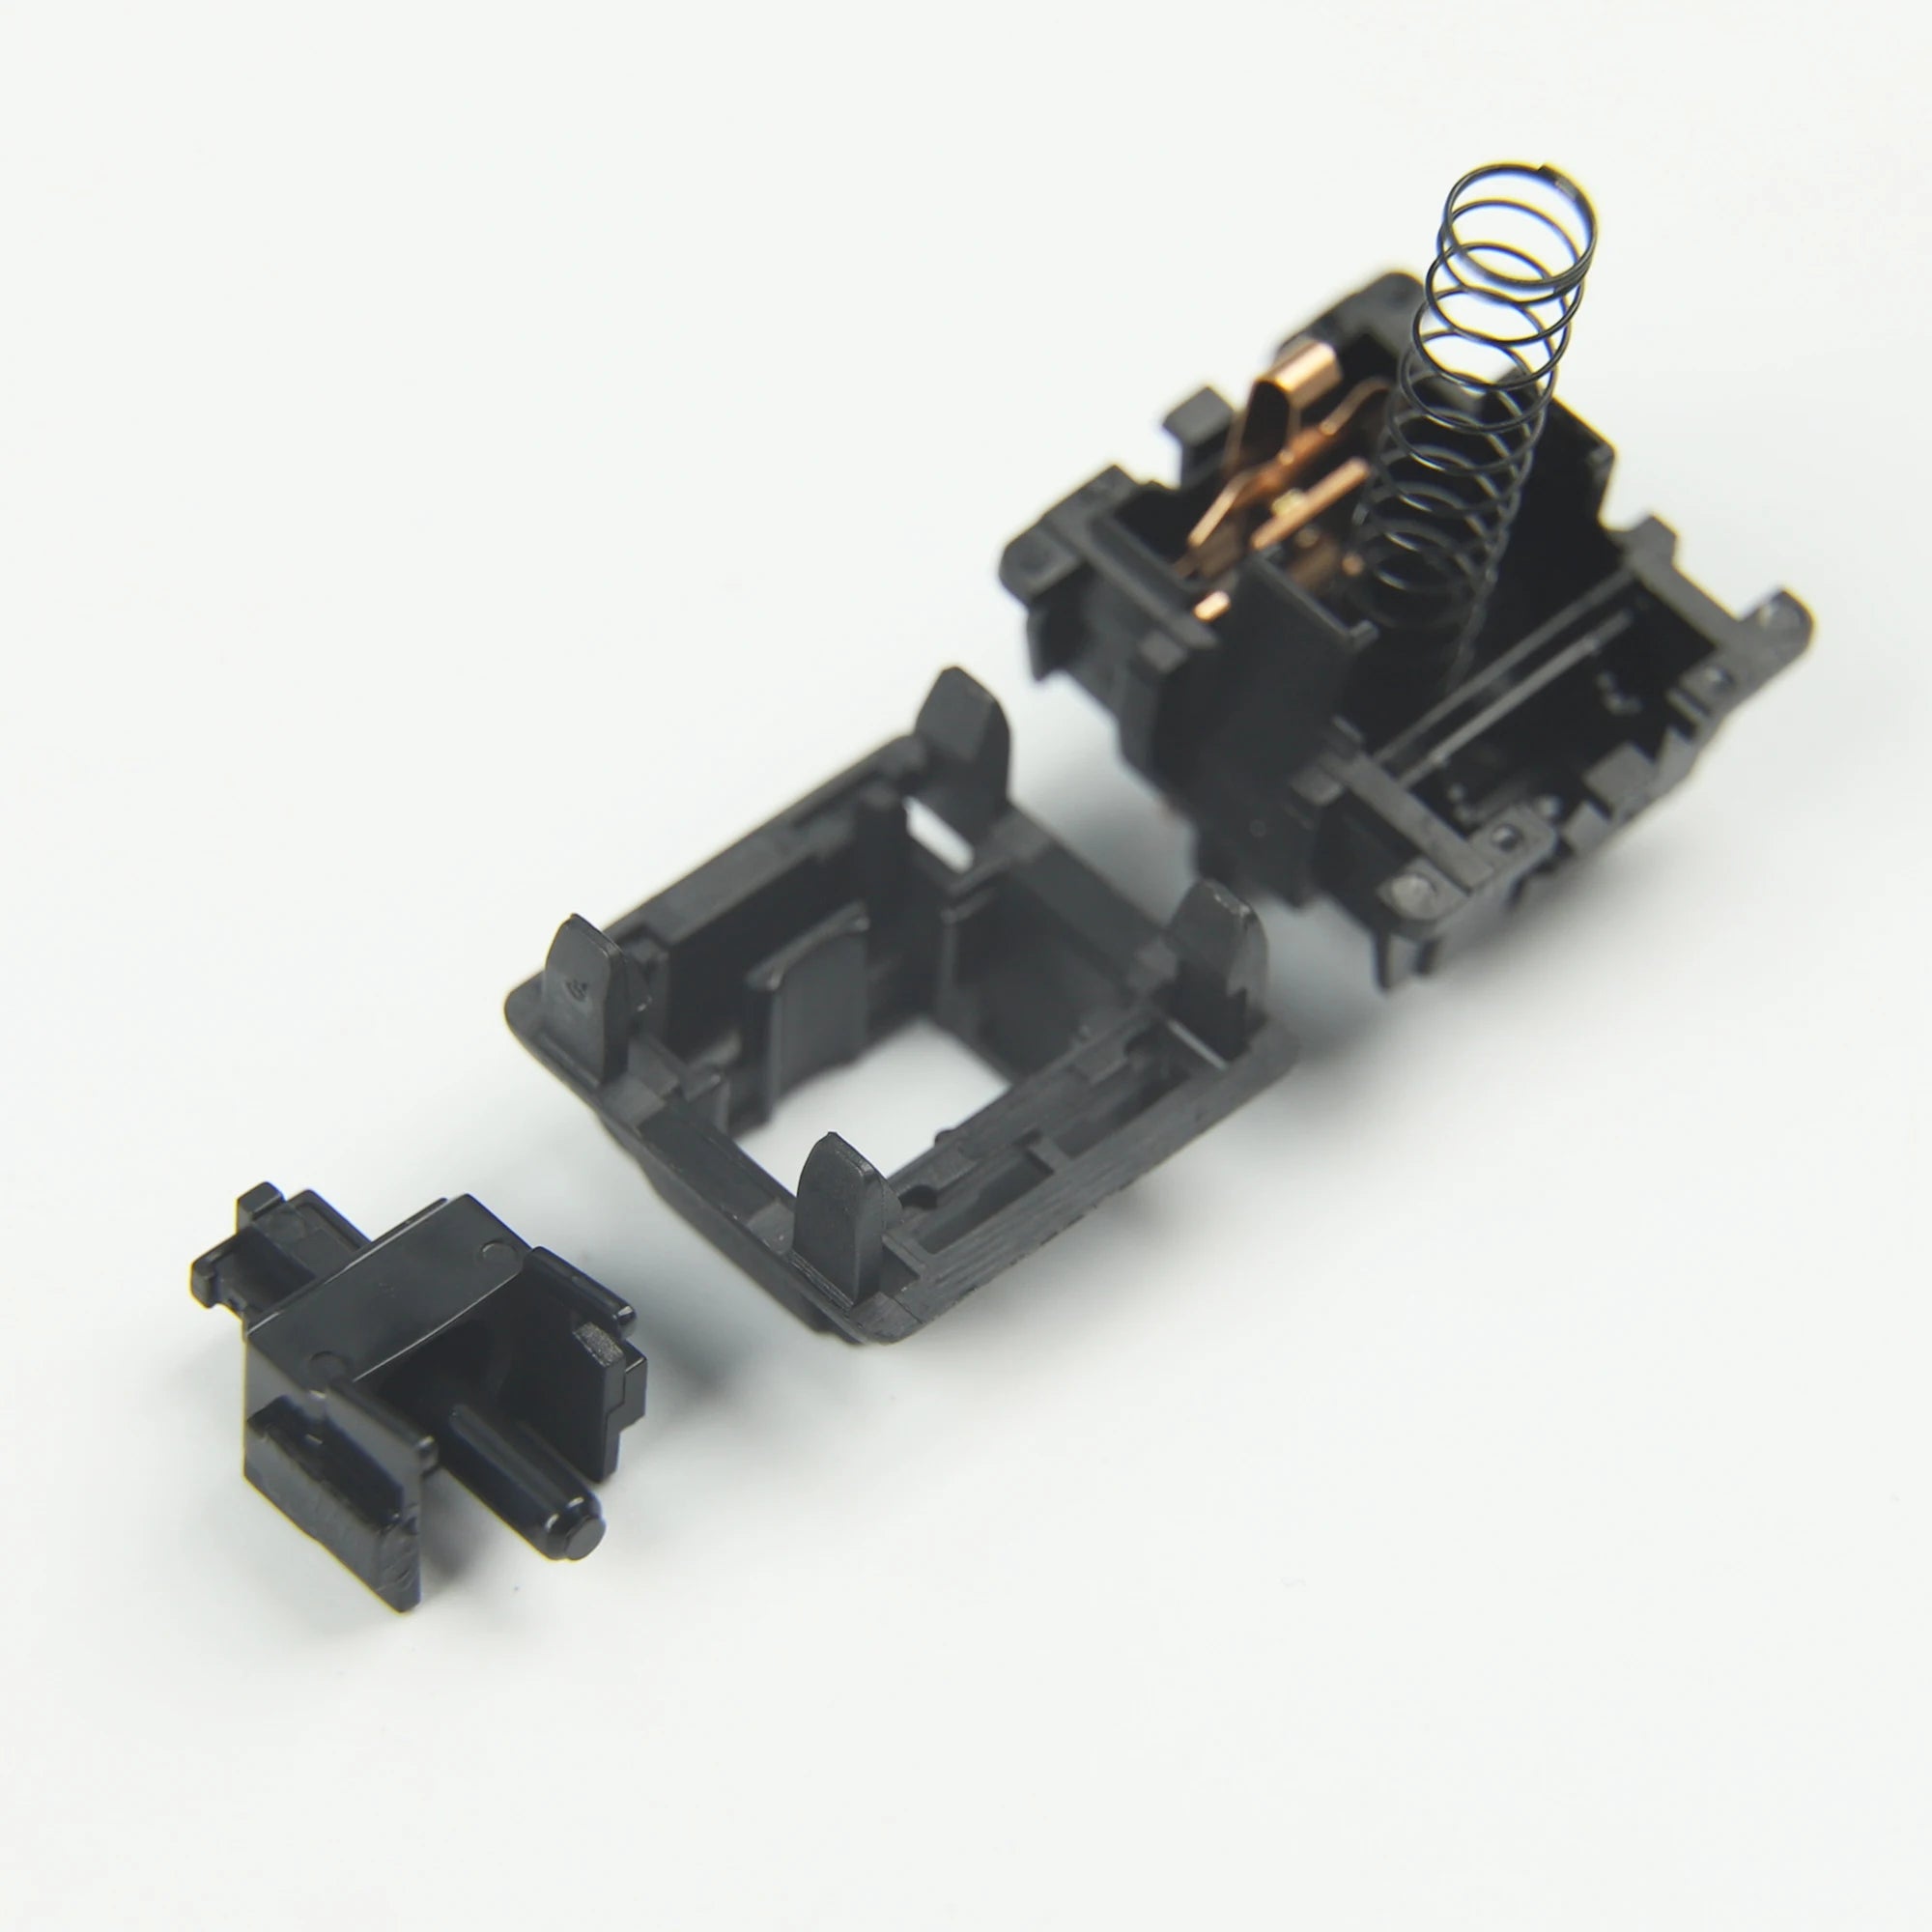 Gateron Oil King Linear Switches - Pre-Lubed, 5-Pin, 55gf Actuation